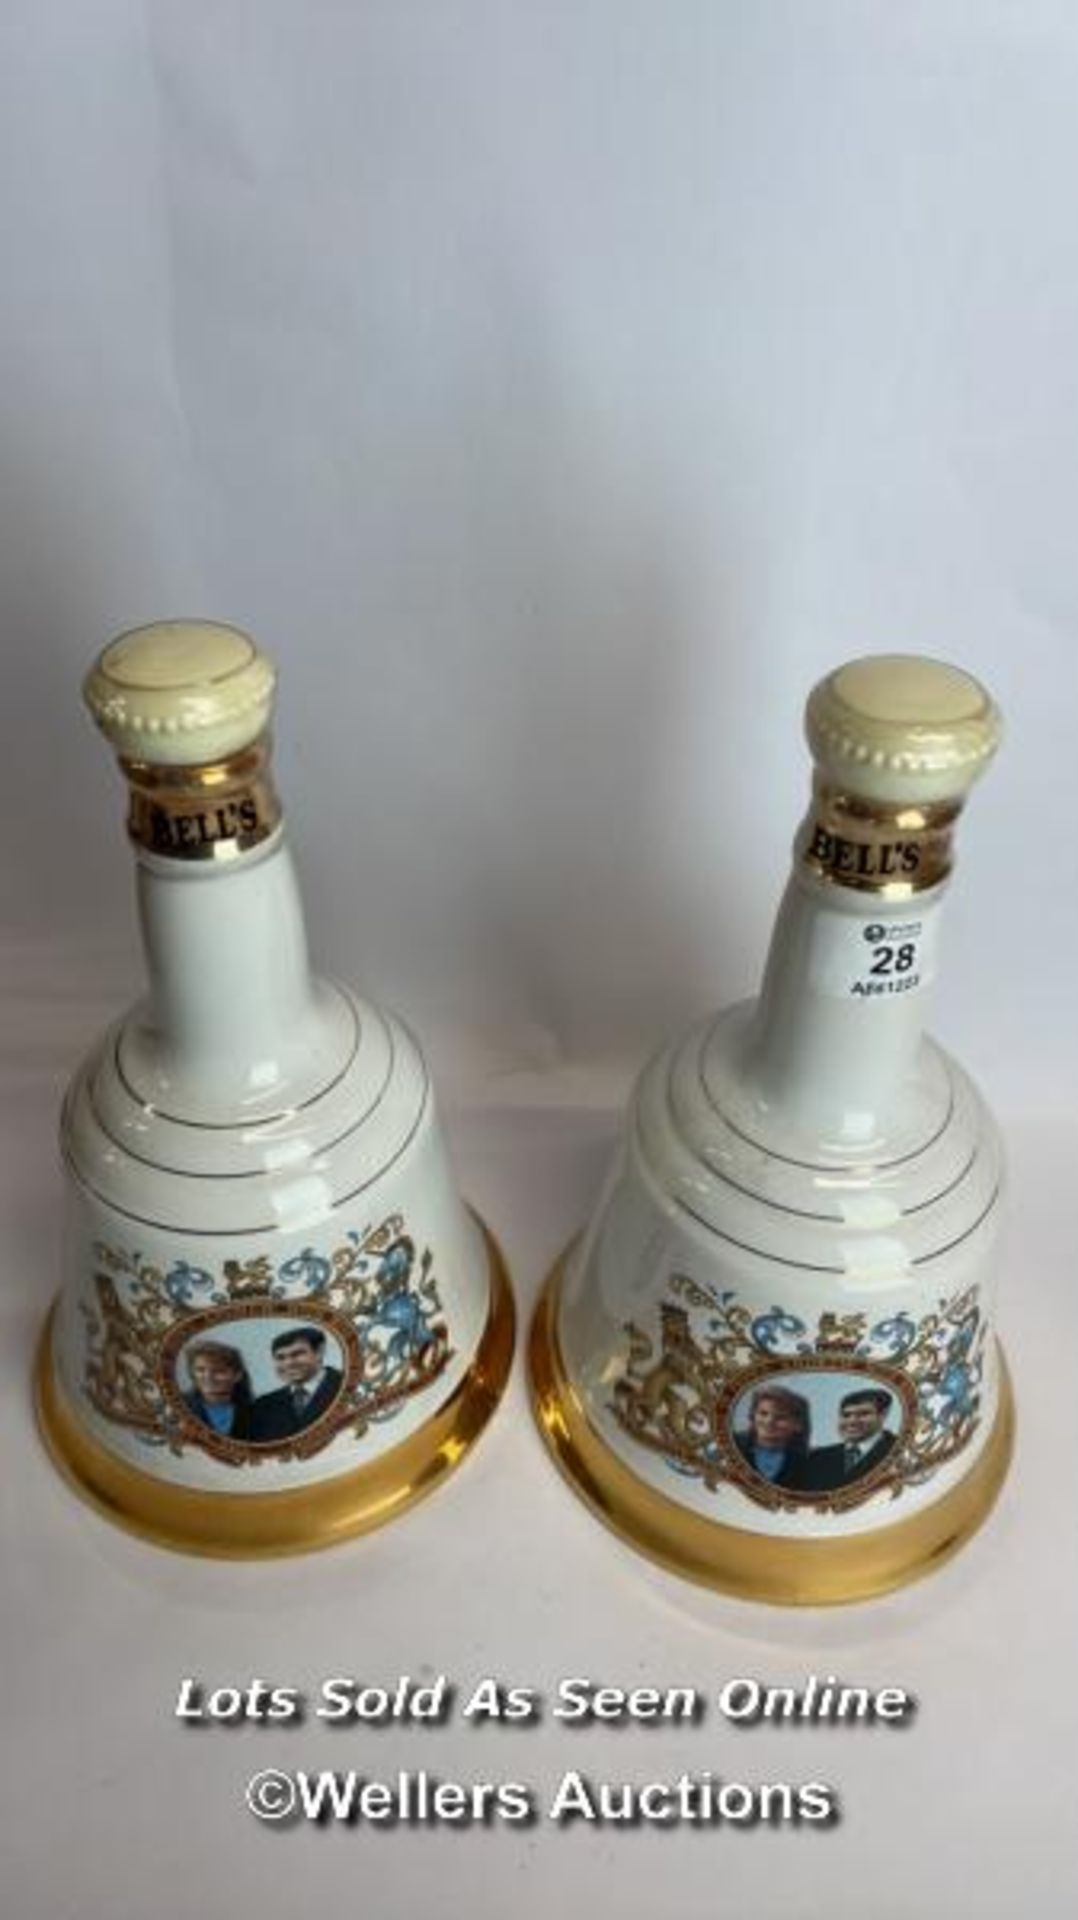 Two Bell's Scotch Whisky Decanters Commemerating The Marriage of Prince Andrew and Sarah Ferguson 23 - Image 5 of 10